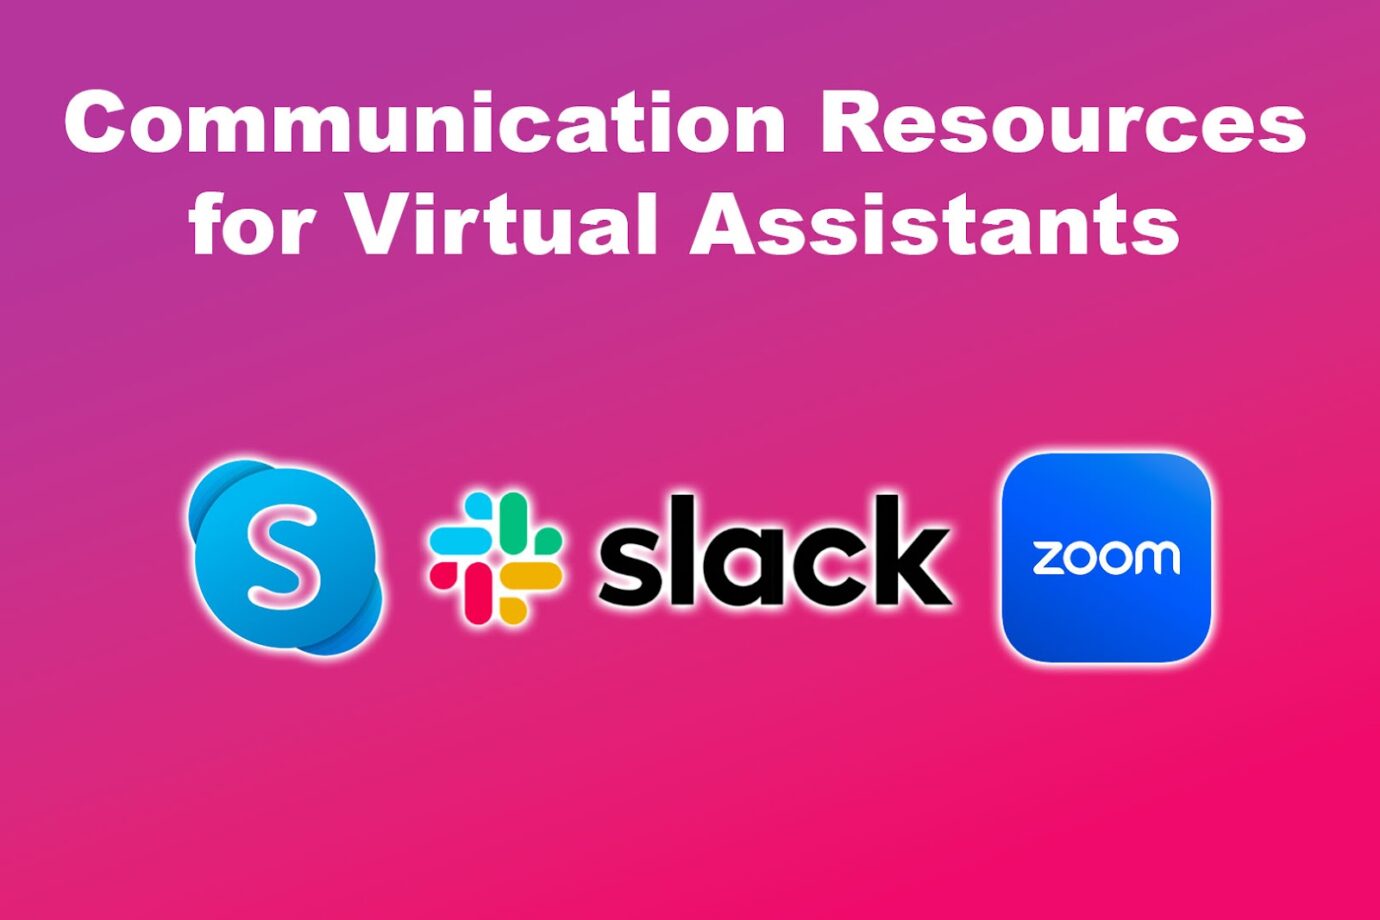 Communication Resources for Virtual Assistants